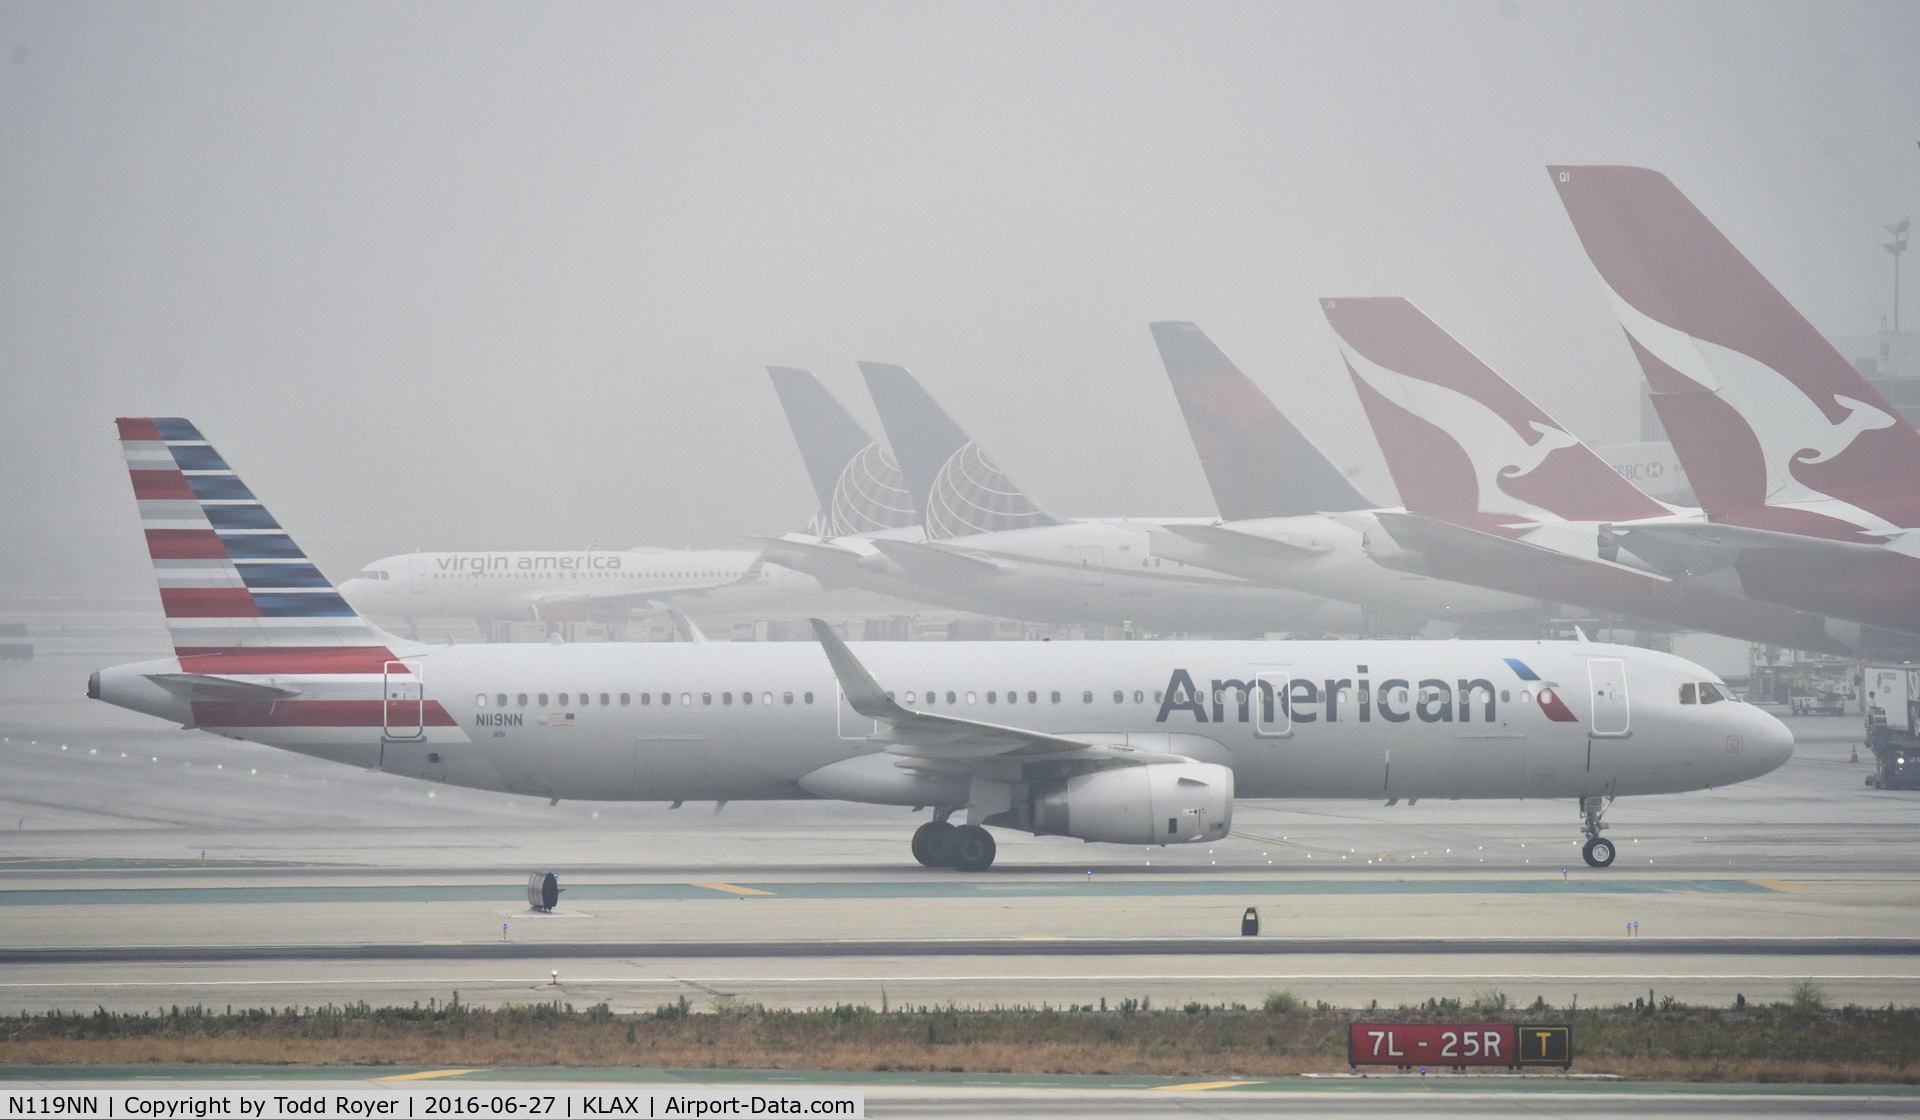 N119NN, 2014 Airbus A321-231 C/N 6222, Taxiing at LAX on a foggy morning